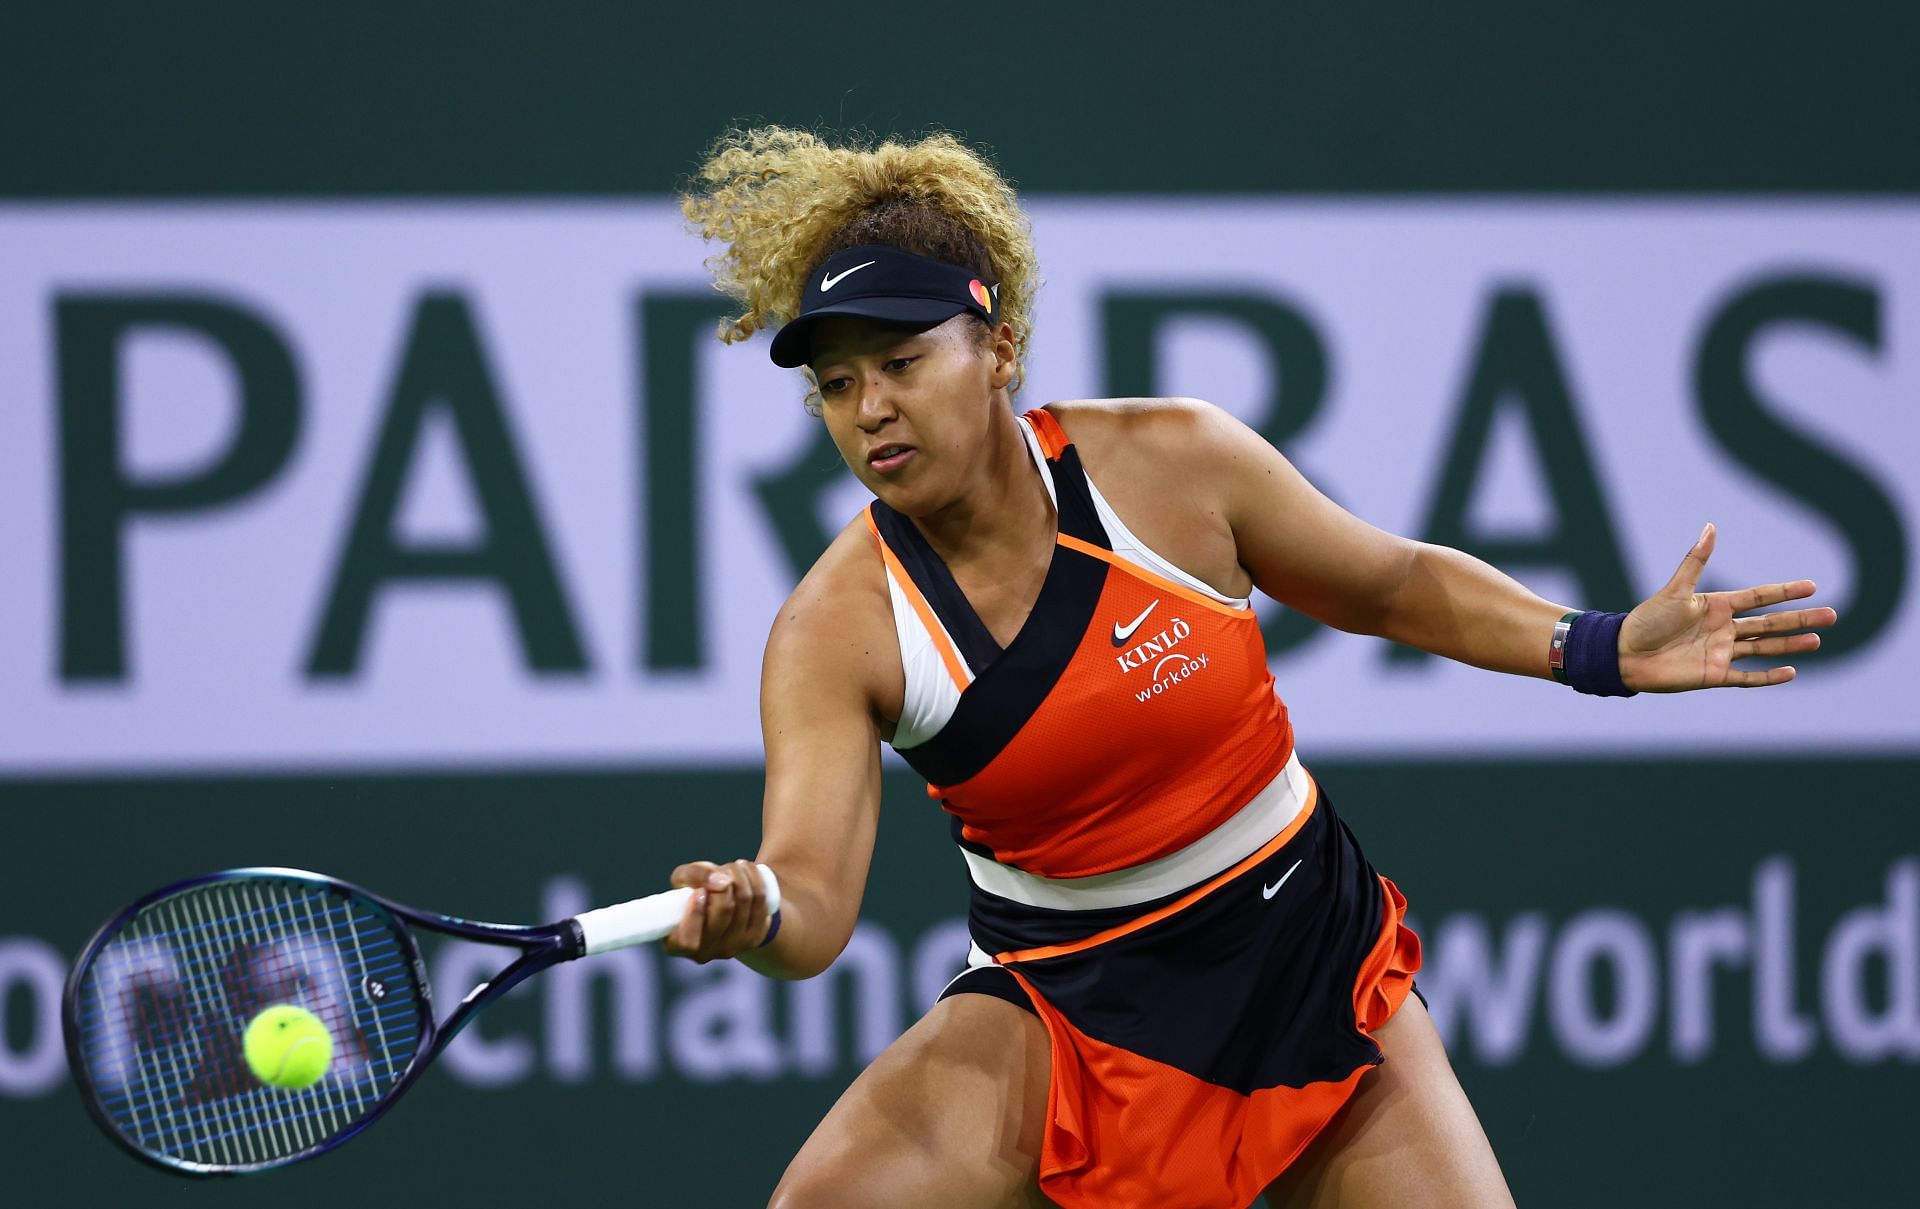 Naomi Osaka will look to have a good run in the Miami Open